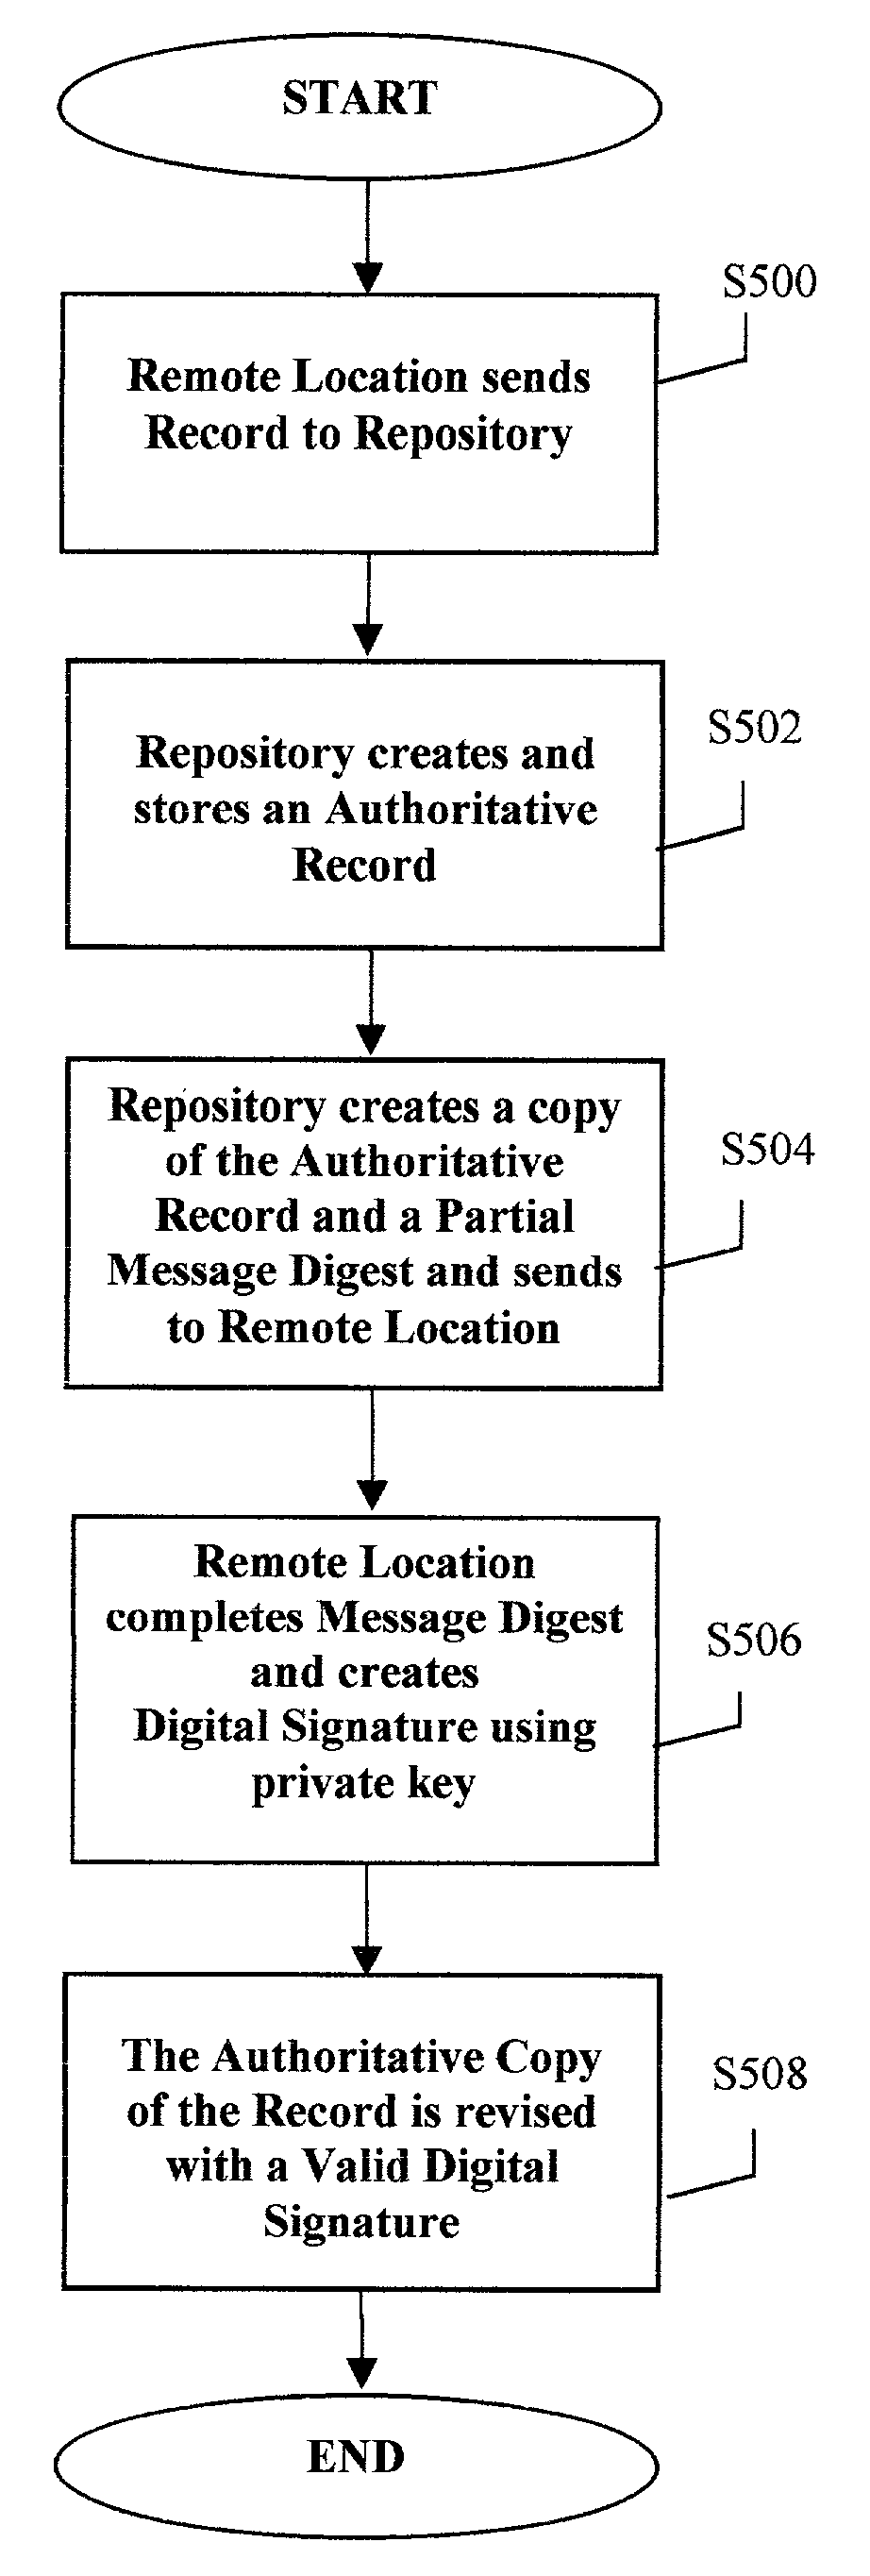 System for obtaining signatures on a single authoritative copy of an electronic record